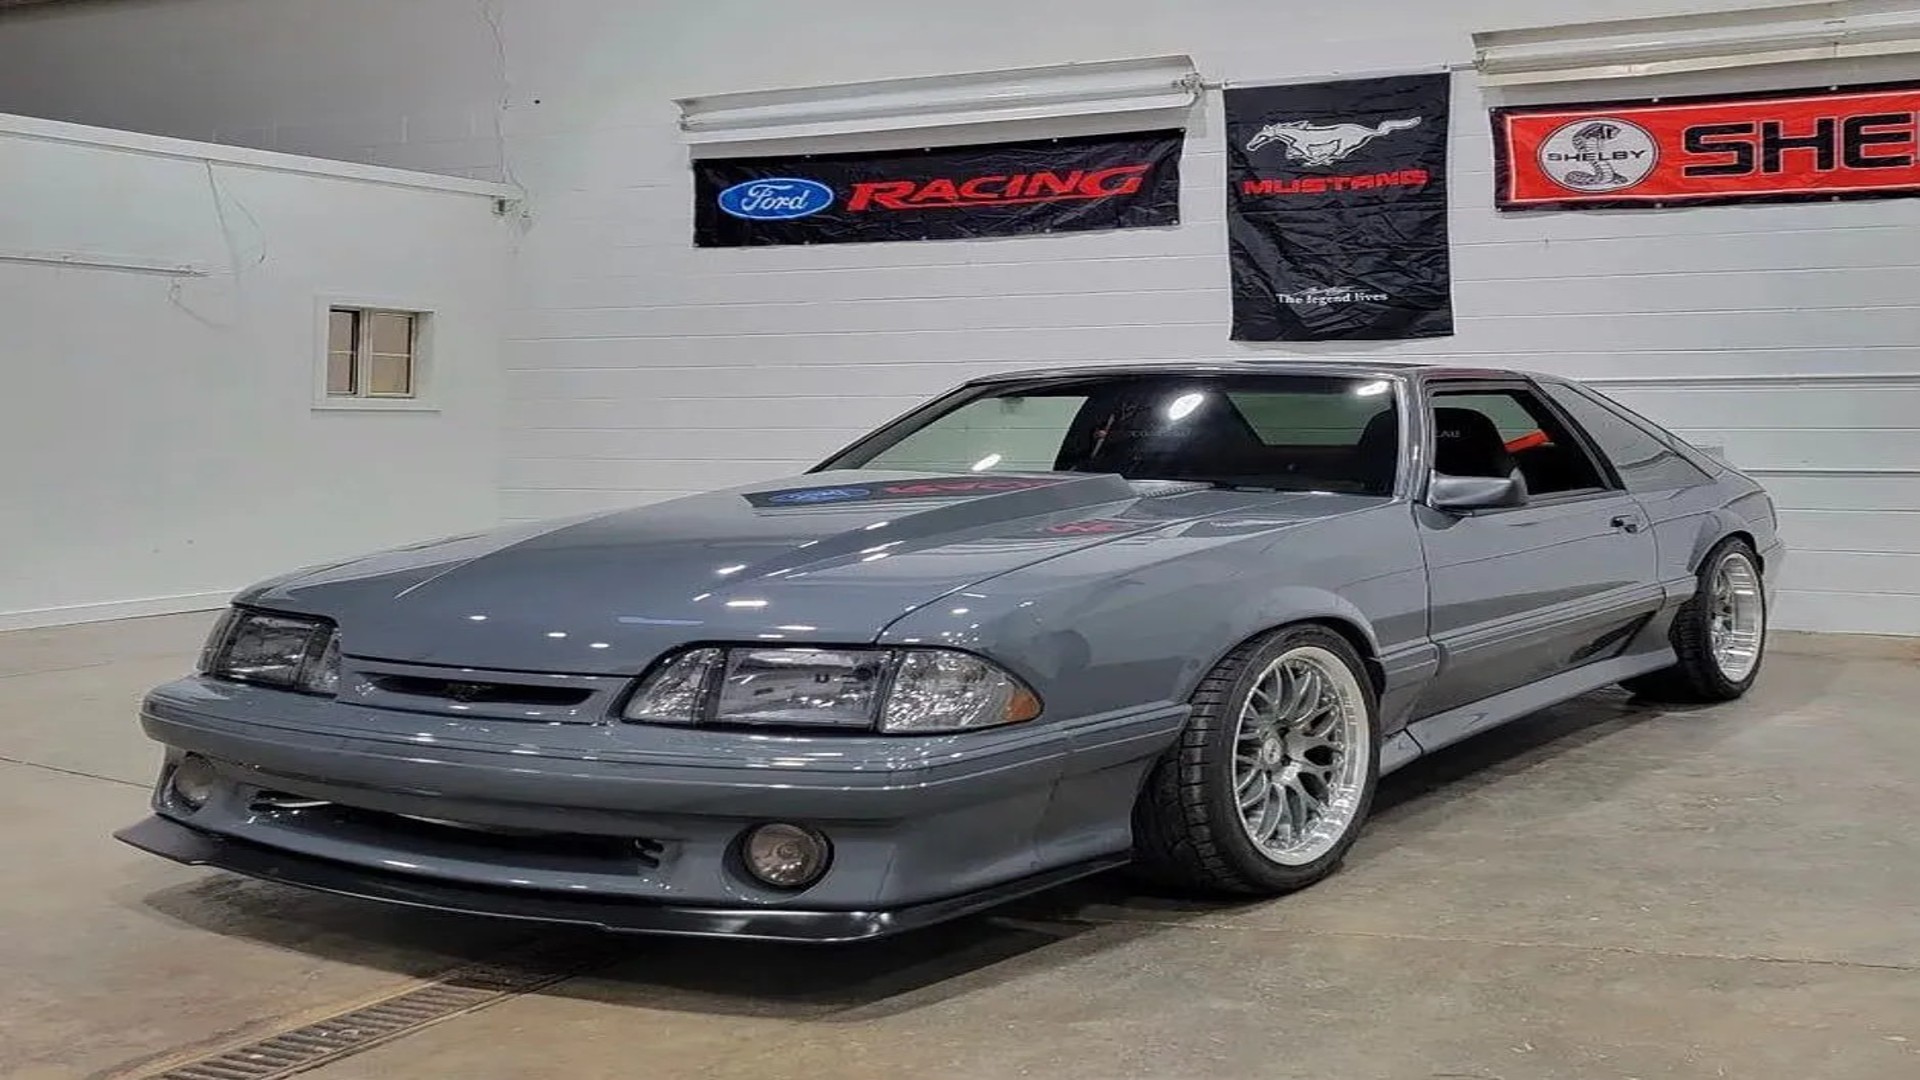 Meet Lochness, the Cleanest Coyote-Swapped Fox Body Mustang We’ve Seen in Ages